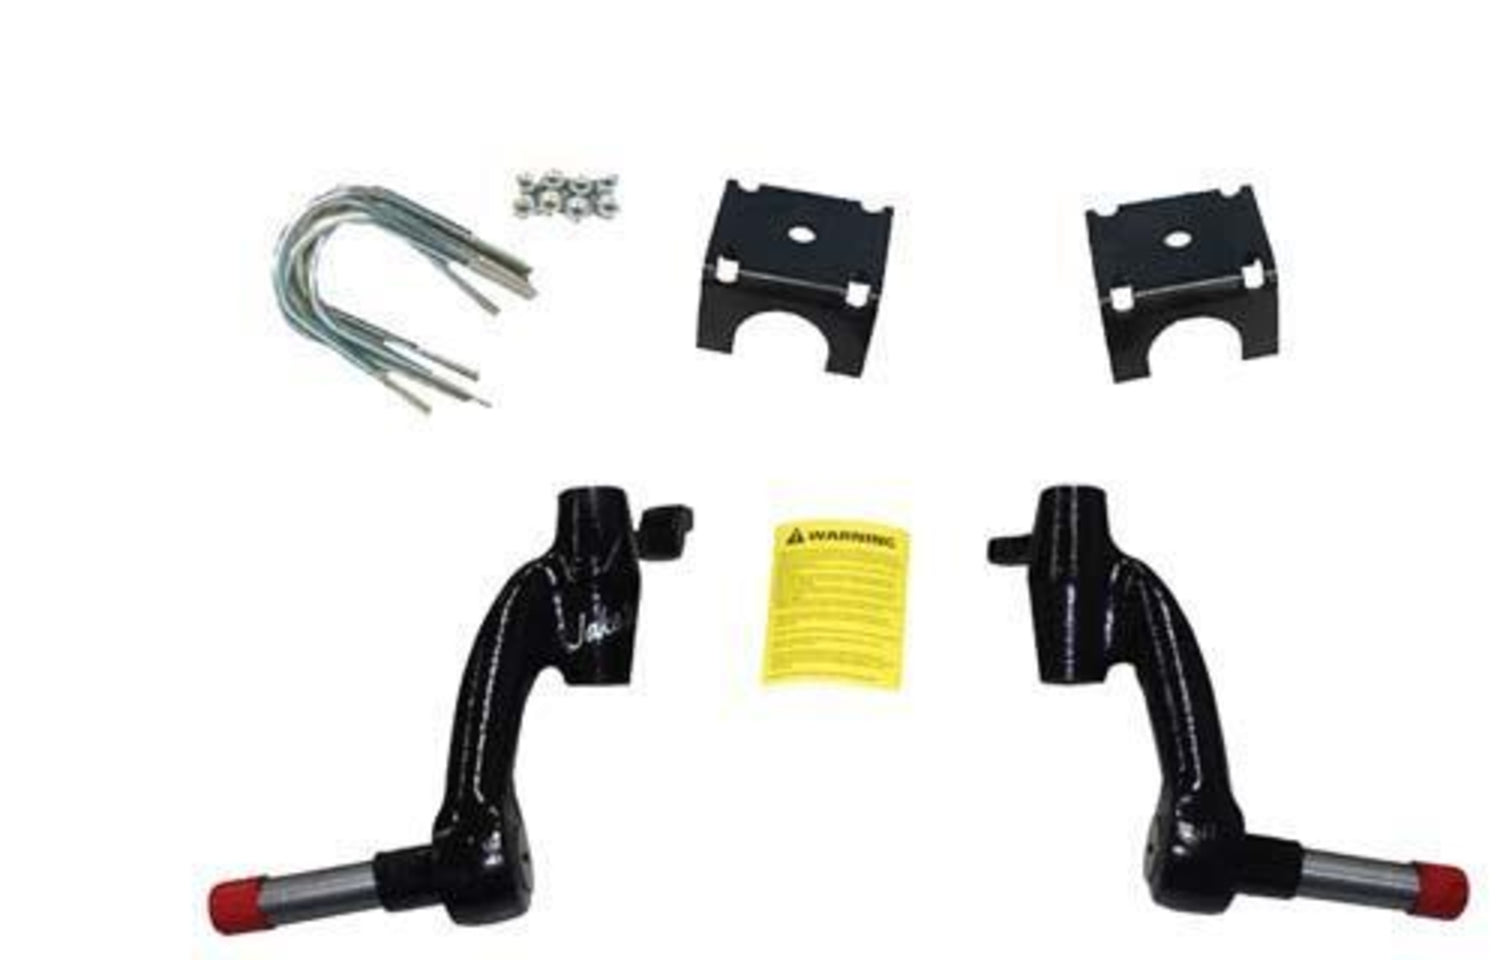 Jake's 6" E-Z-GO TXT Gas Spindle Lift Kit (Years 2001 - 2009)